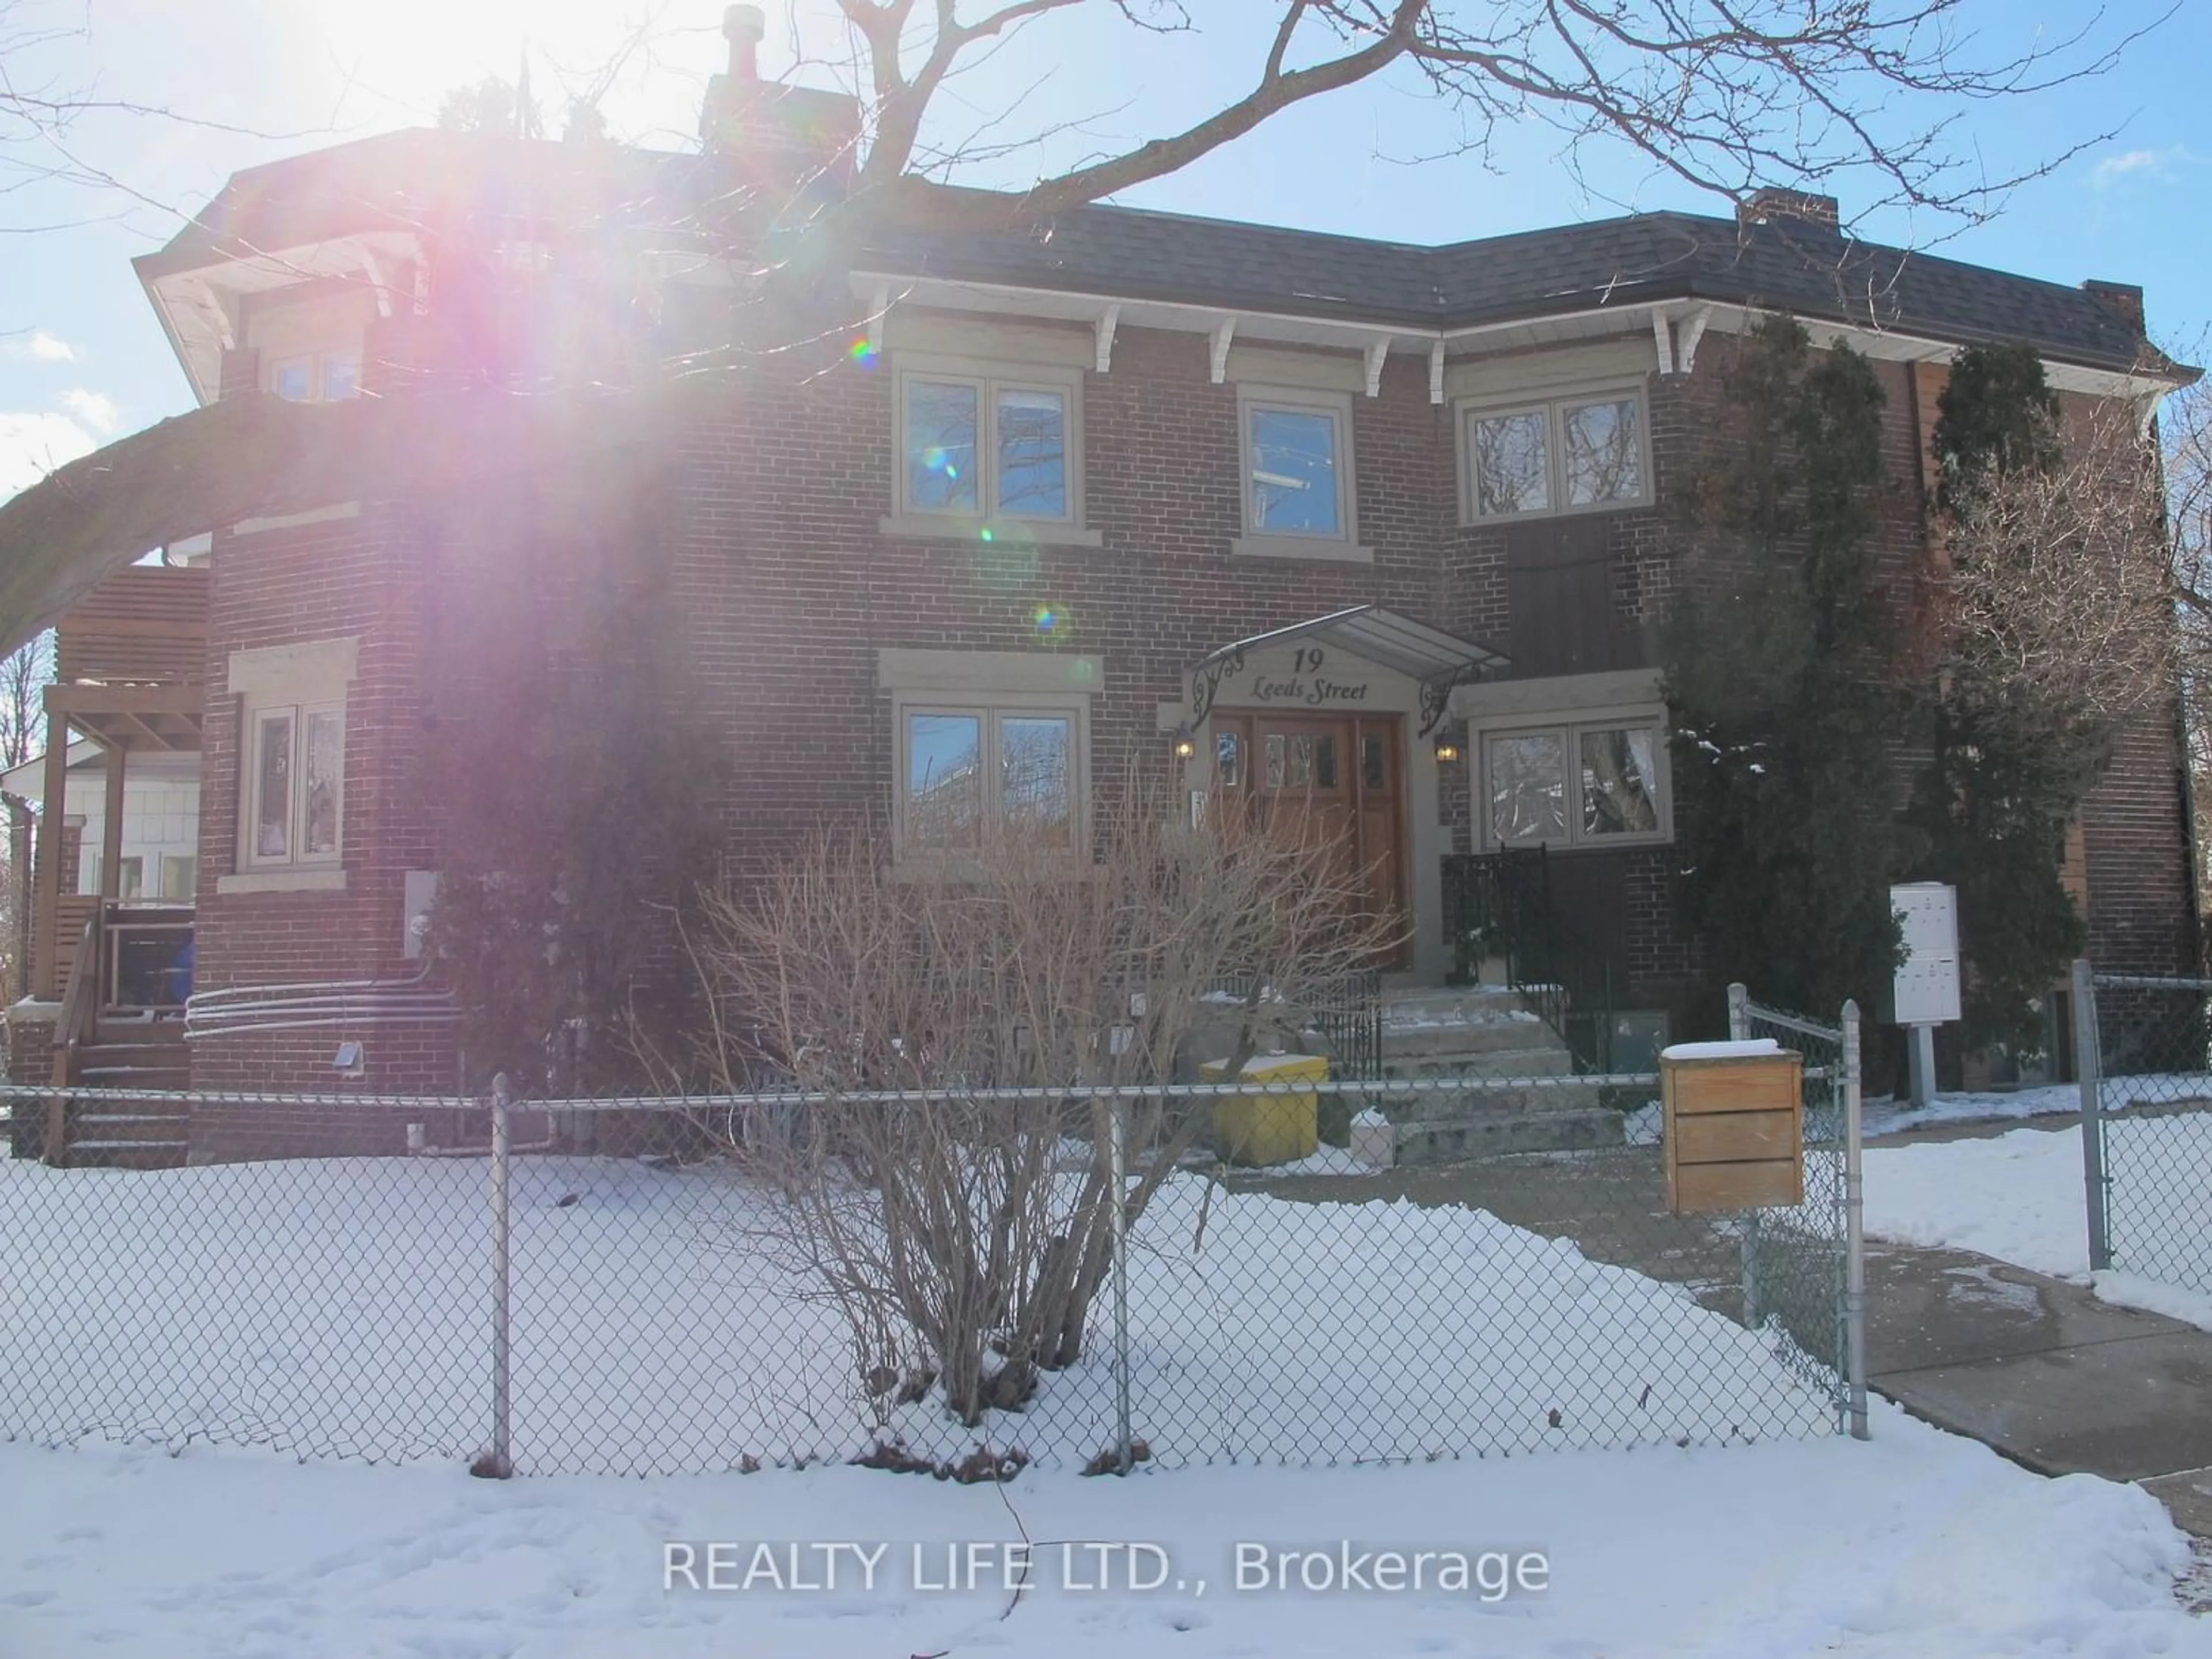 Frontside or backside of a home for 19 Leeds St, Toronto Ontario M6G 1N8